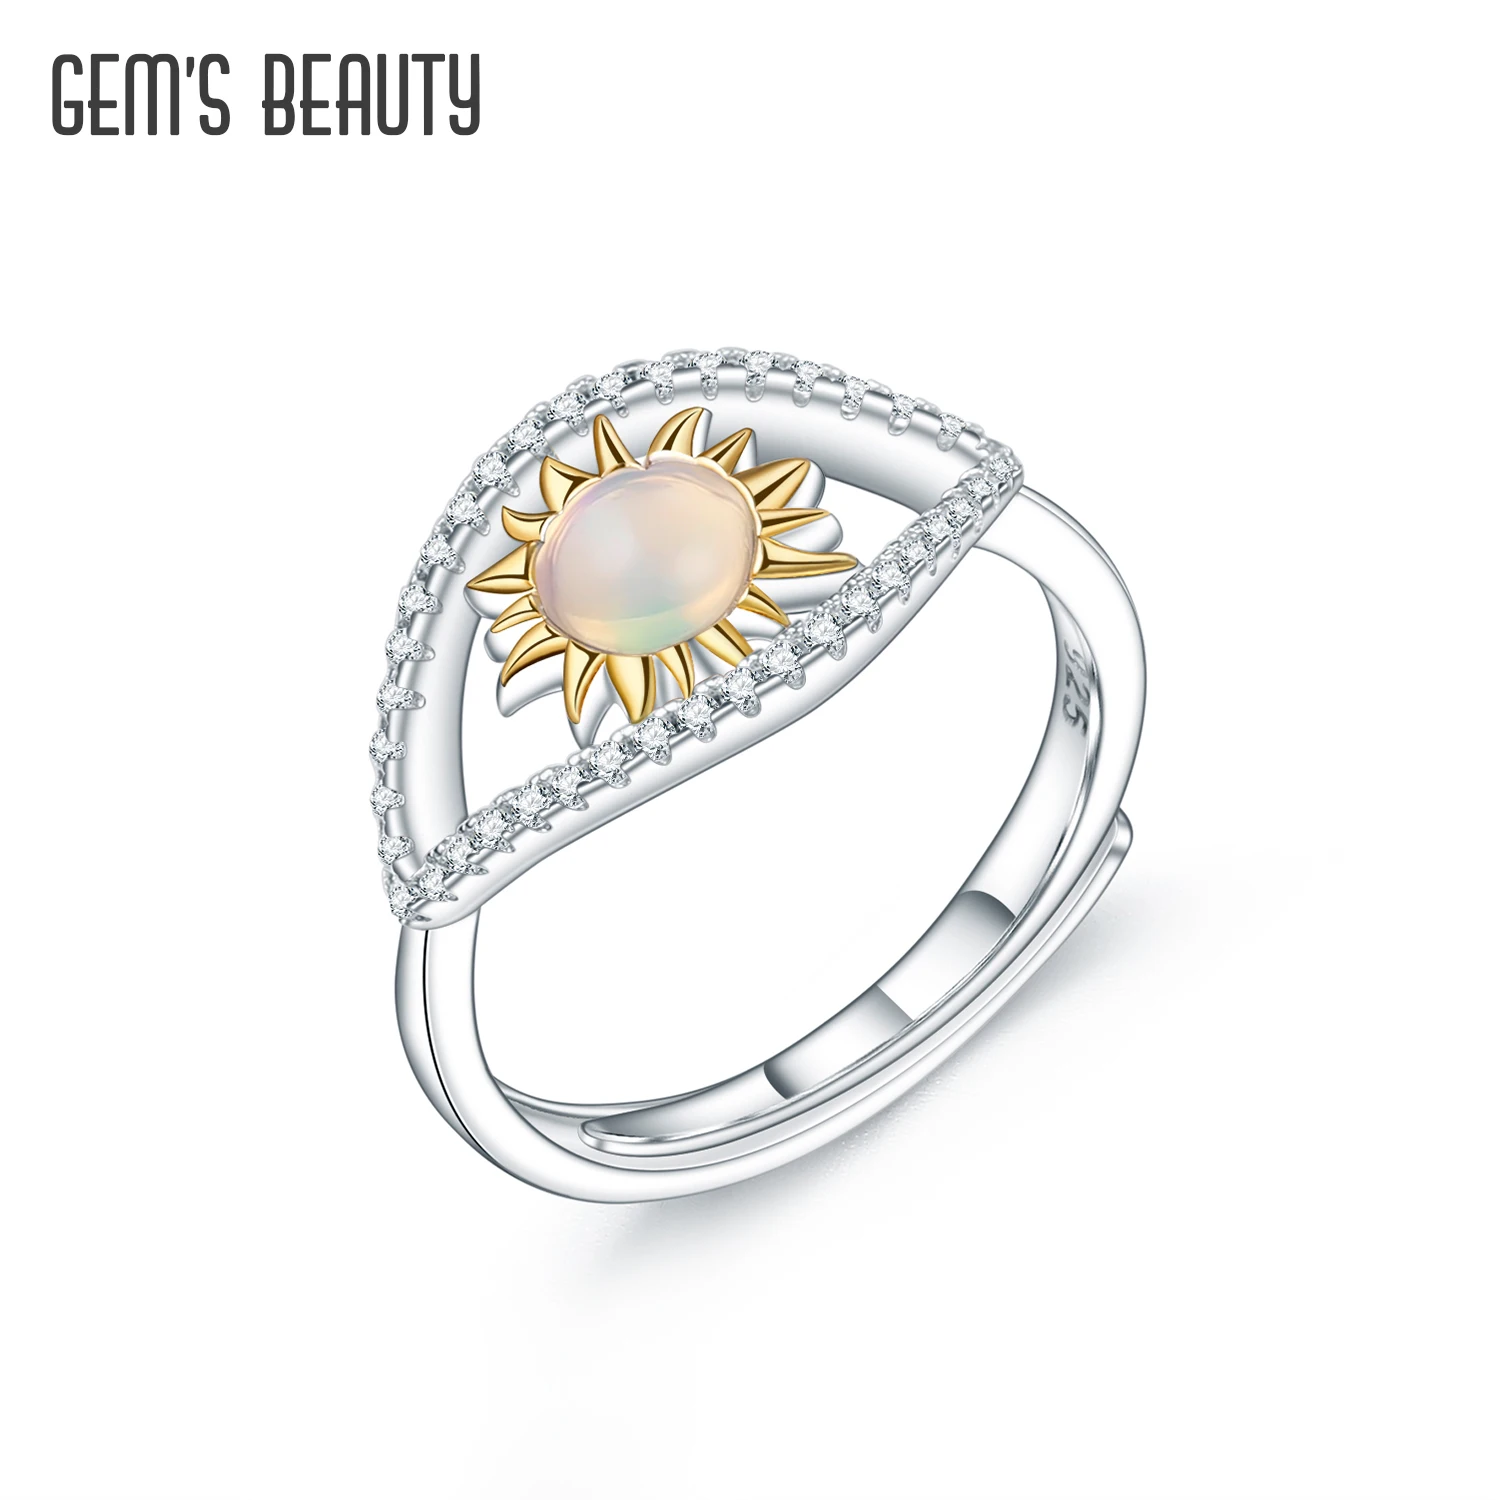 

GEM'S BEAUTY Devil's Eye Rings For Women Real 925 Sterling Silver Natural Opal Gemstone Statement Open Adjustable Ring Jewelry